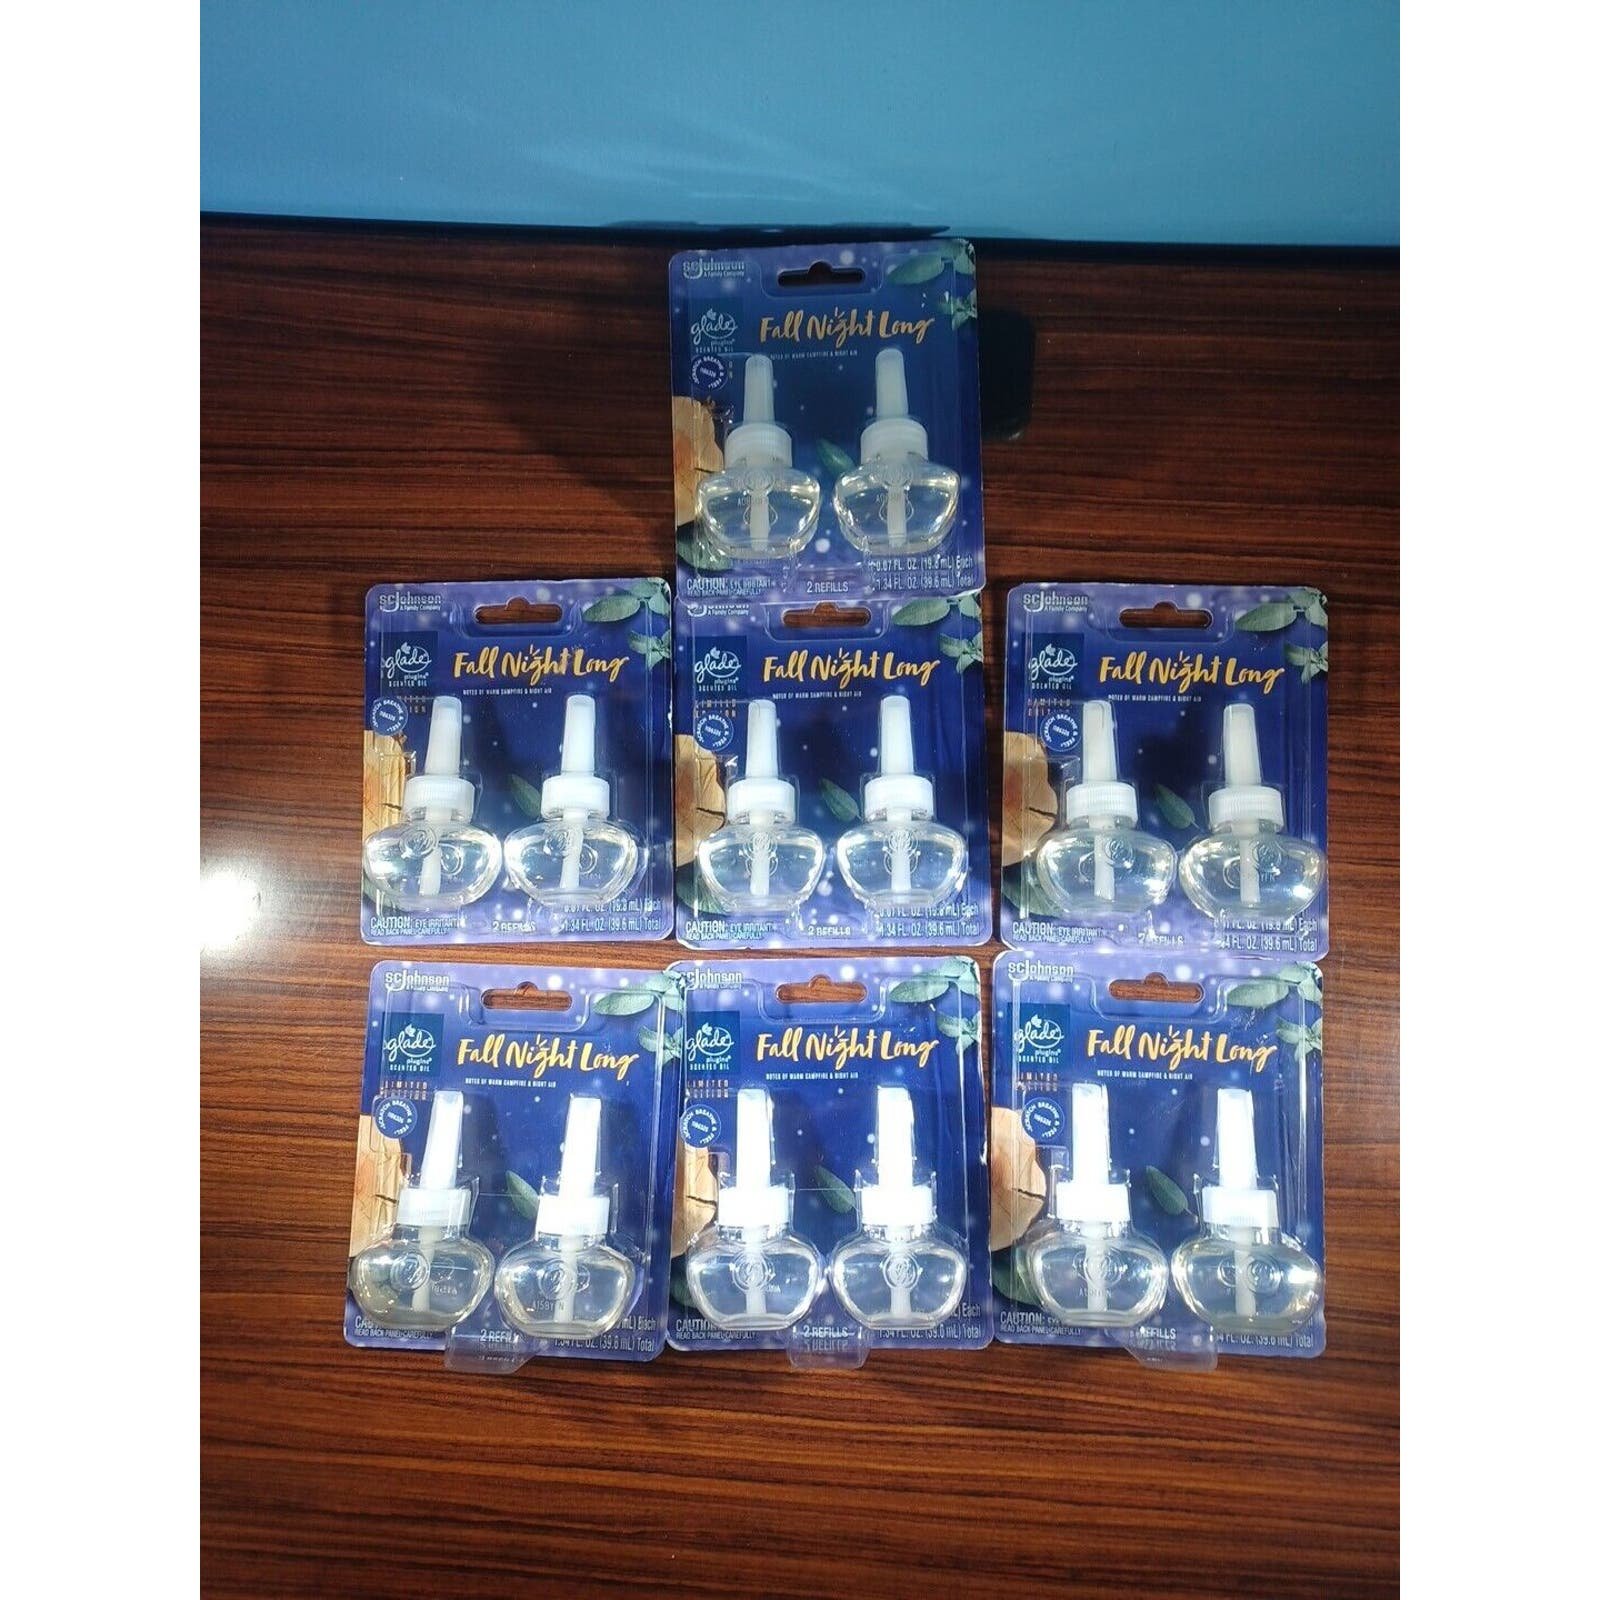 14 Glade PlugIns Fall Night Long Scented Oil Air Freshener Refills Limited Ed. DOQfKBg2Y